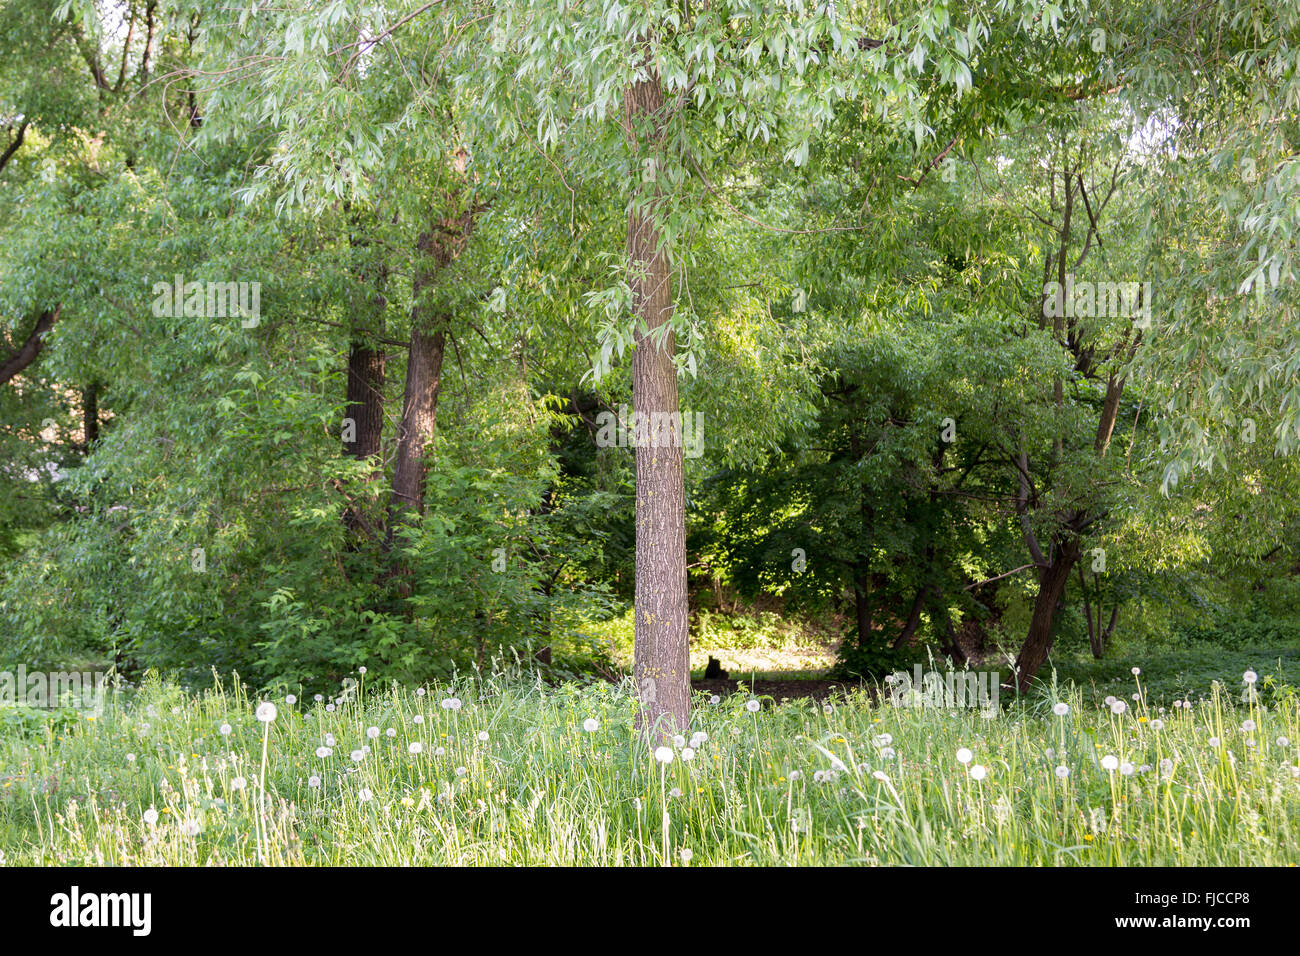 grass trees and bushes in the park Stock Photo